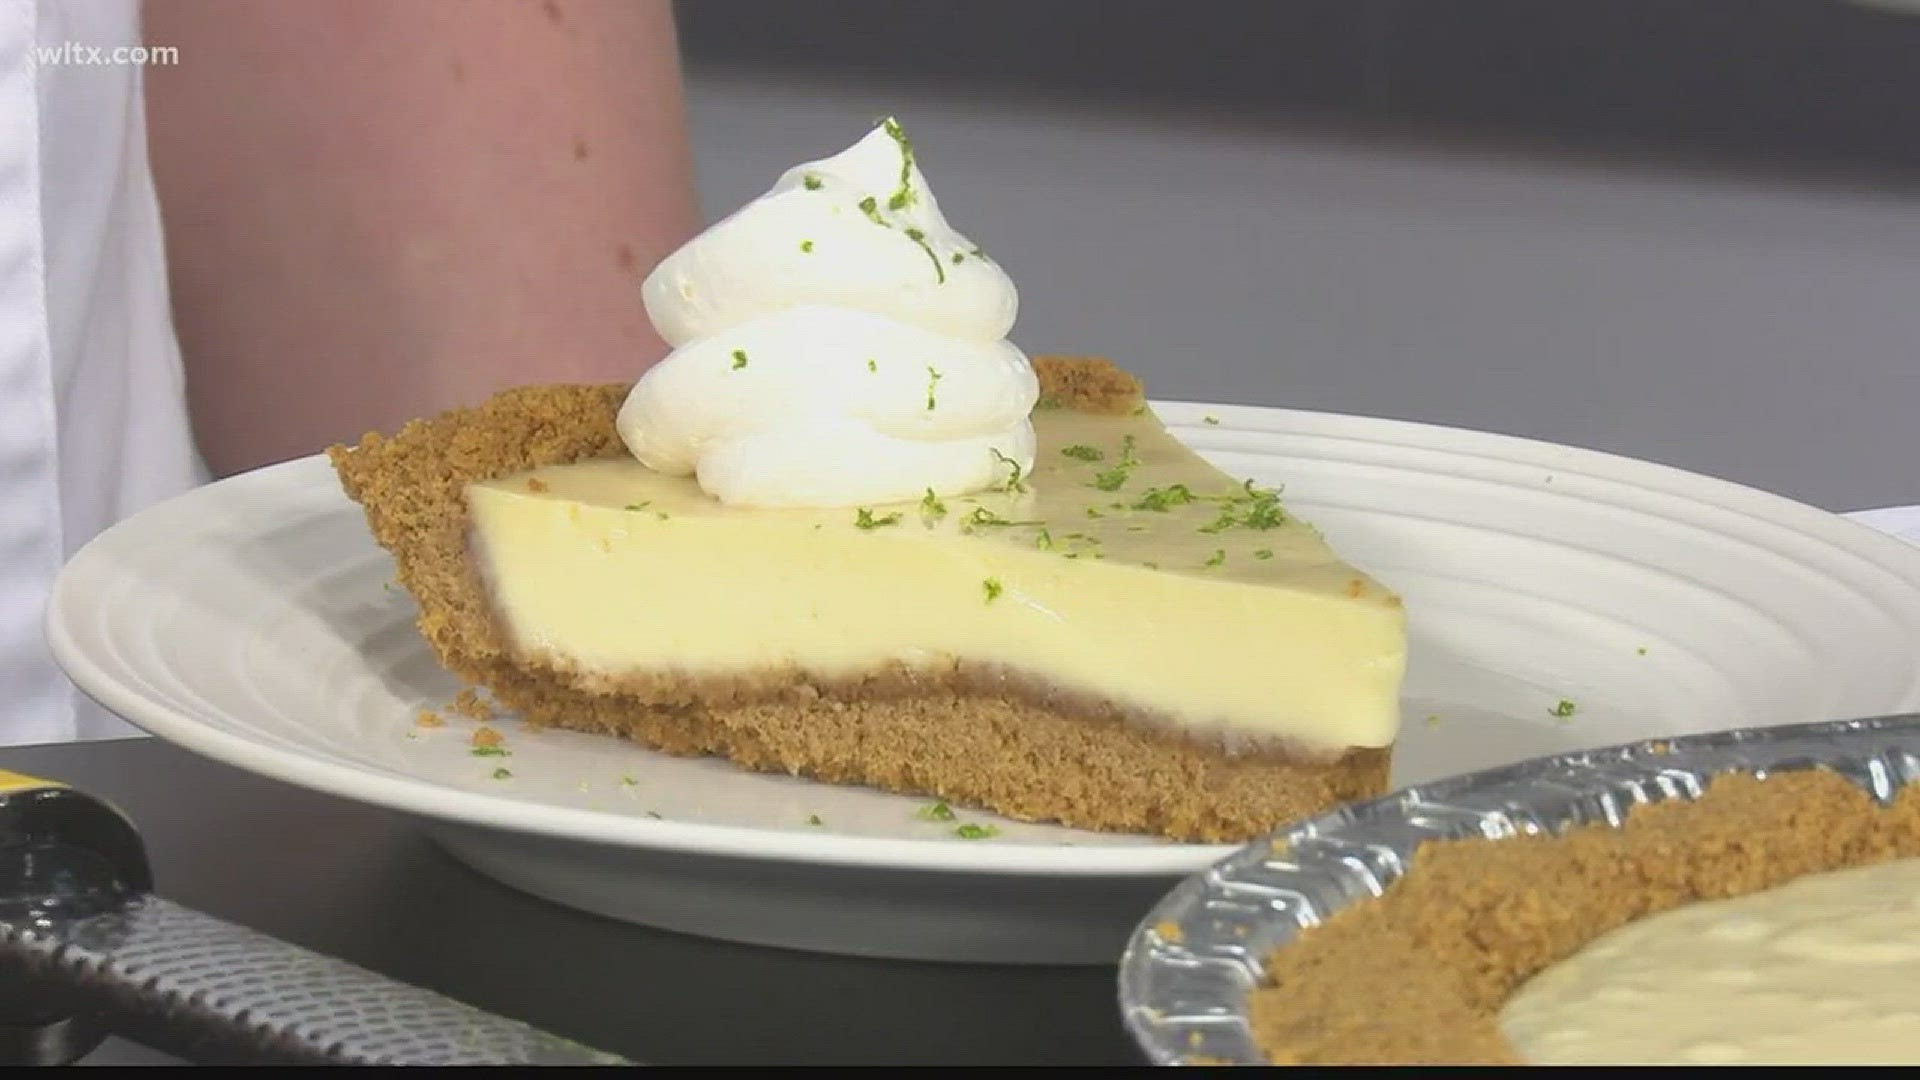 For the next ten days, we'll be presenting all the culinary goodness our state has to offer. And, to get us underway, Blue Marlin's Executive Chef, Maegan Horton, whipped up her delicious Key lime pie!